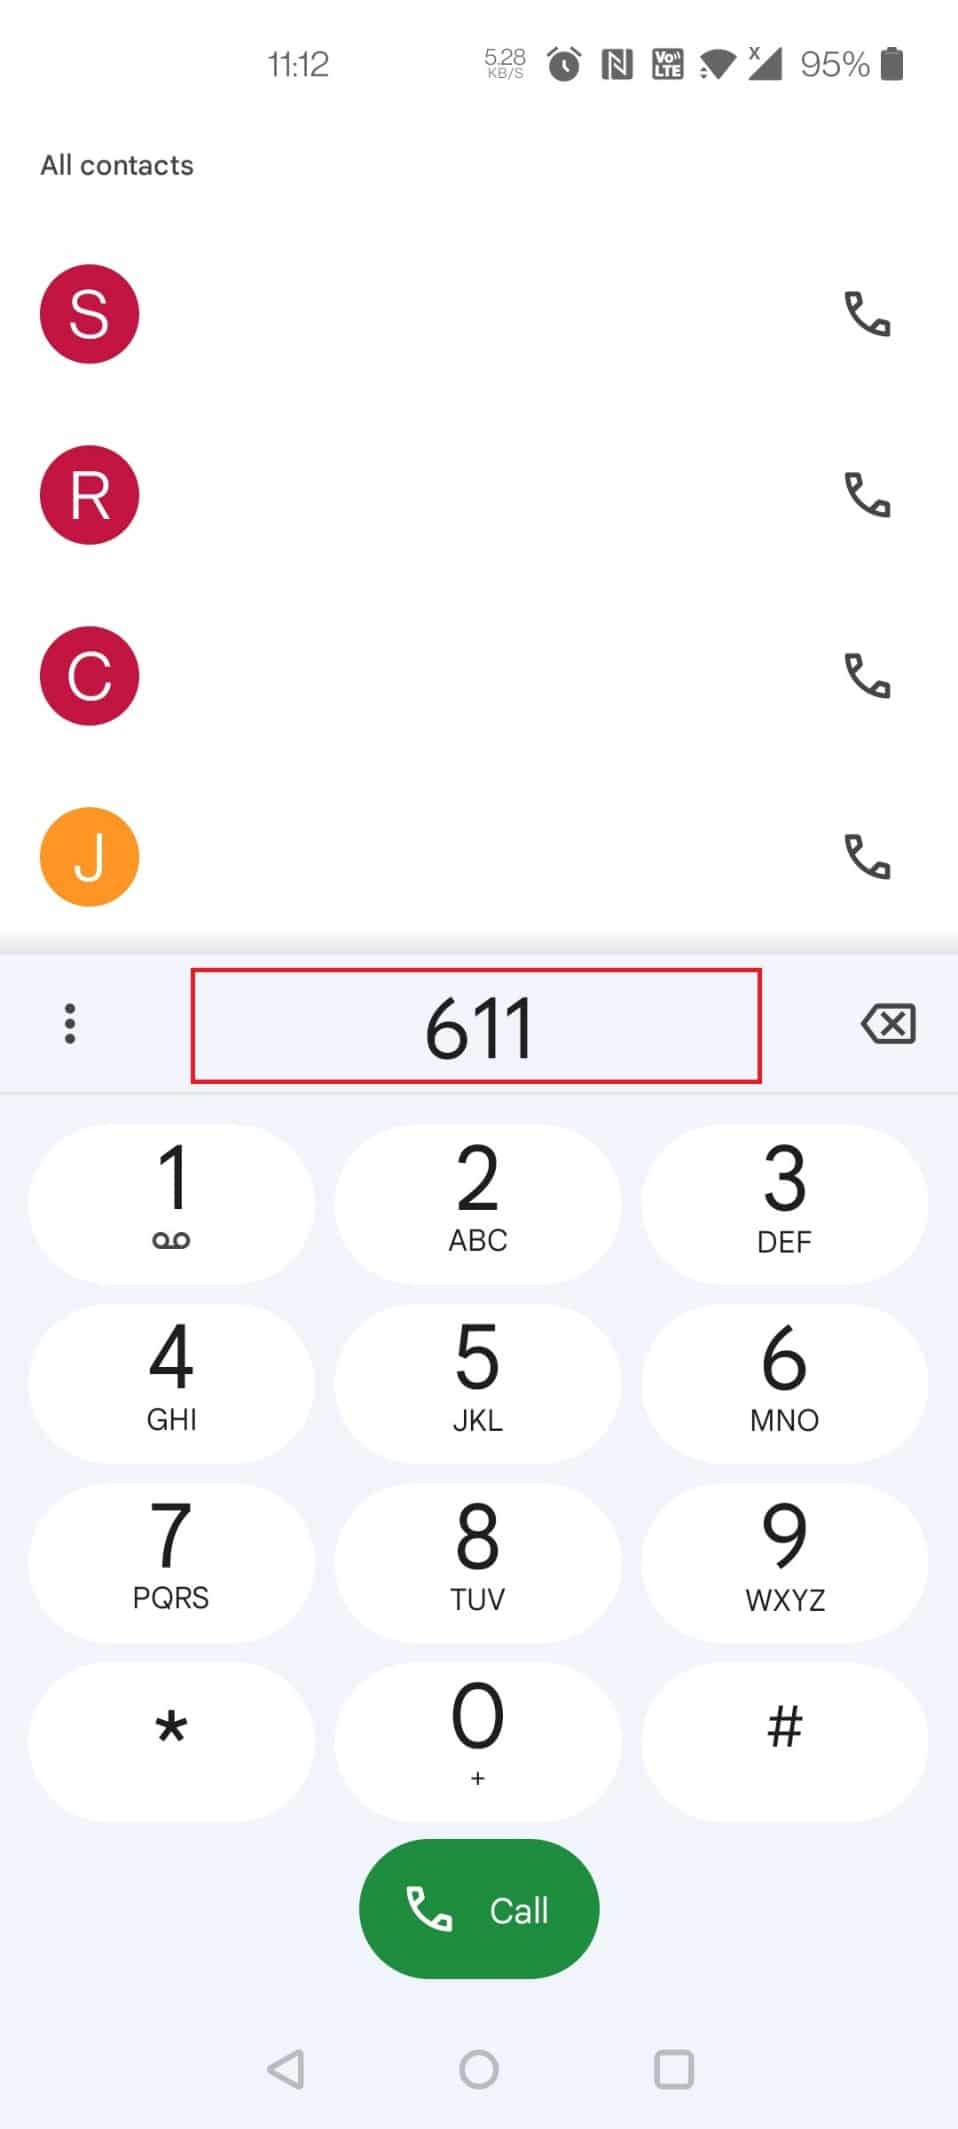 Launch the caller app on your smartphone and dial 611